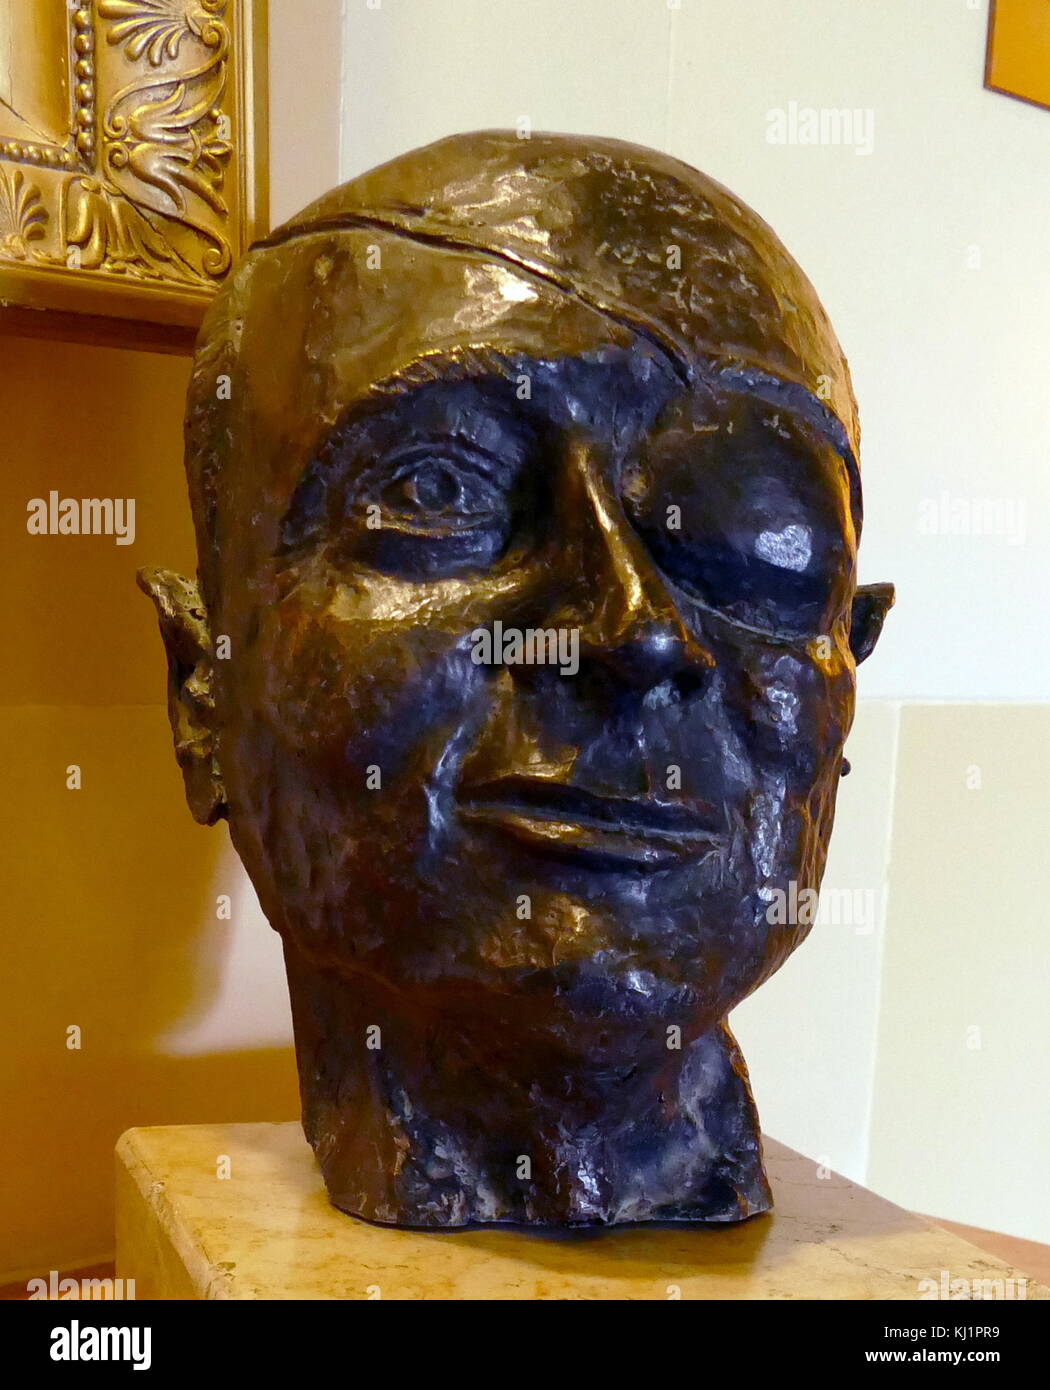 Bust of Israeli politician Moshe Dayan, by Levi Shochat 1973. Moshe Dayan  (1915 – 1981) was an Israeli military leader and politician. chief of staff  of the Israel Defense Forces (1953–58) during